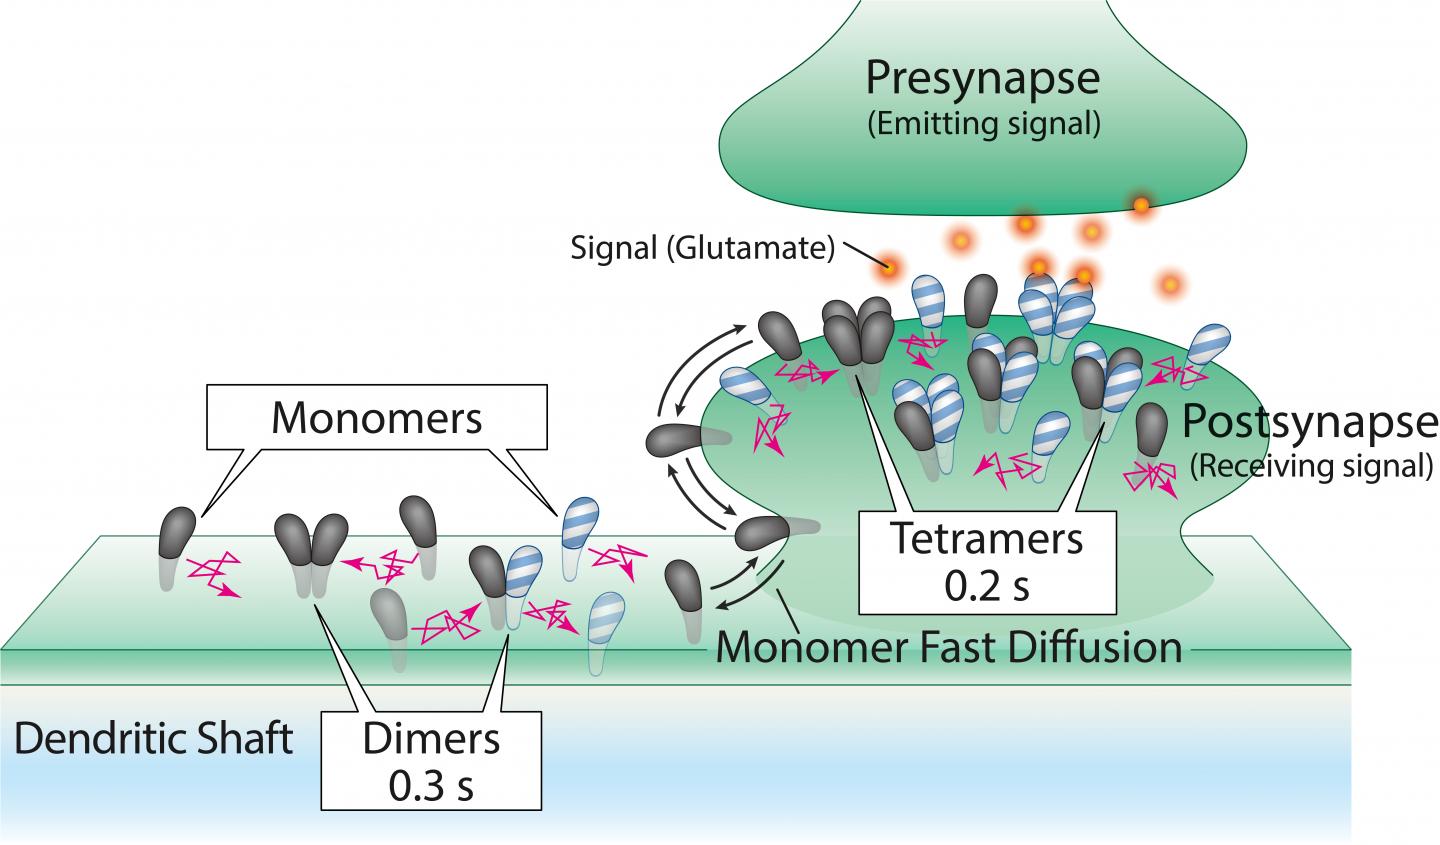 Diagram of Tetramer Formation in the Synapse